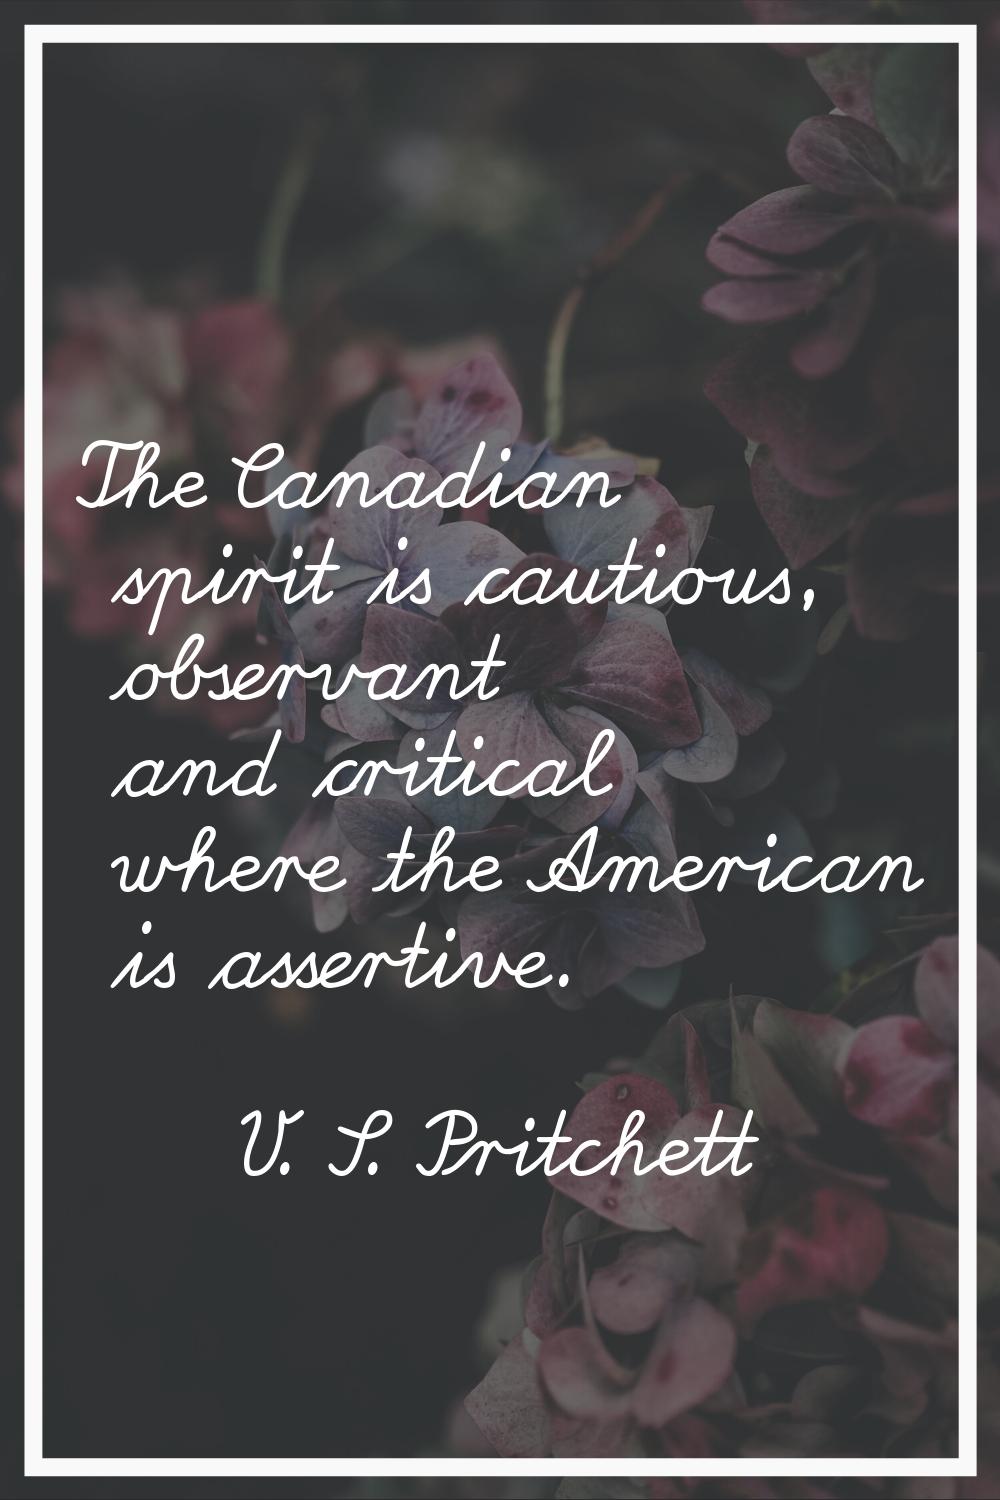 The Canadian spirit is cautious, observant and critical where the American is assertive.